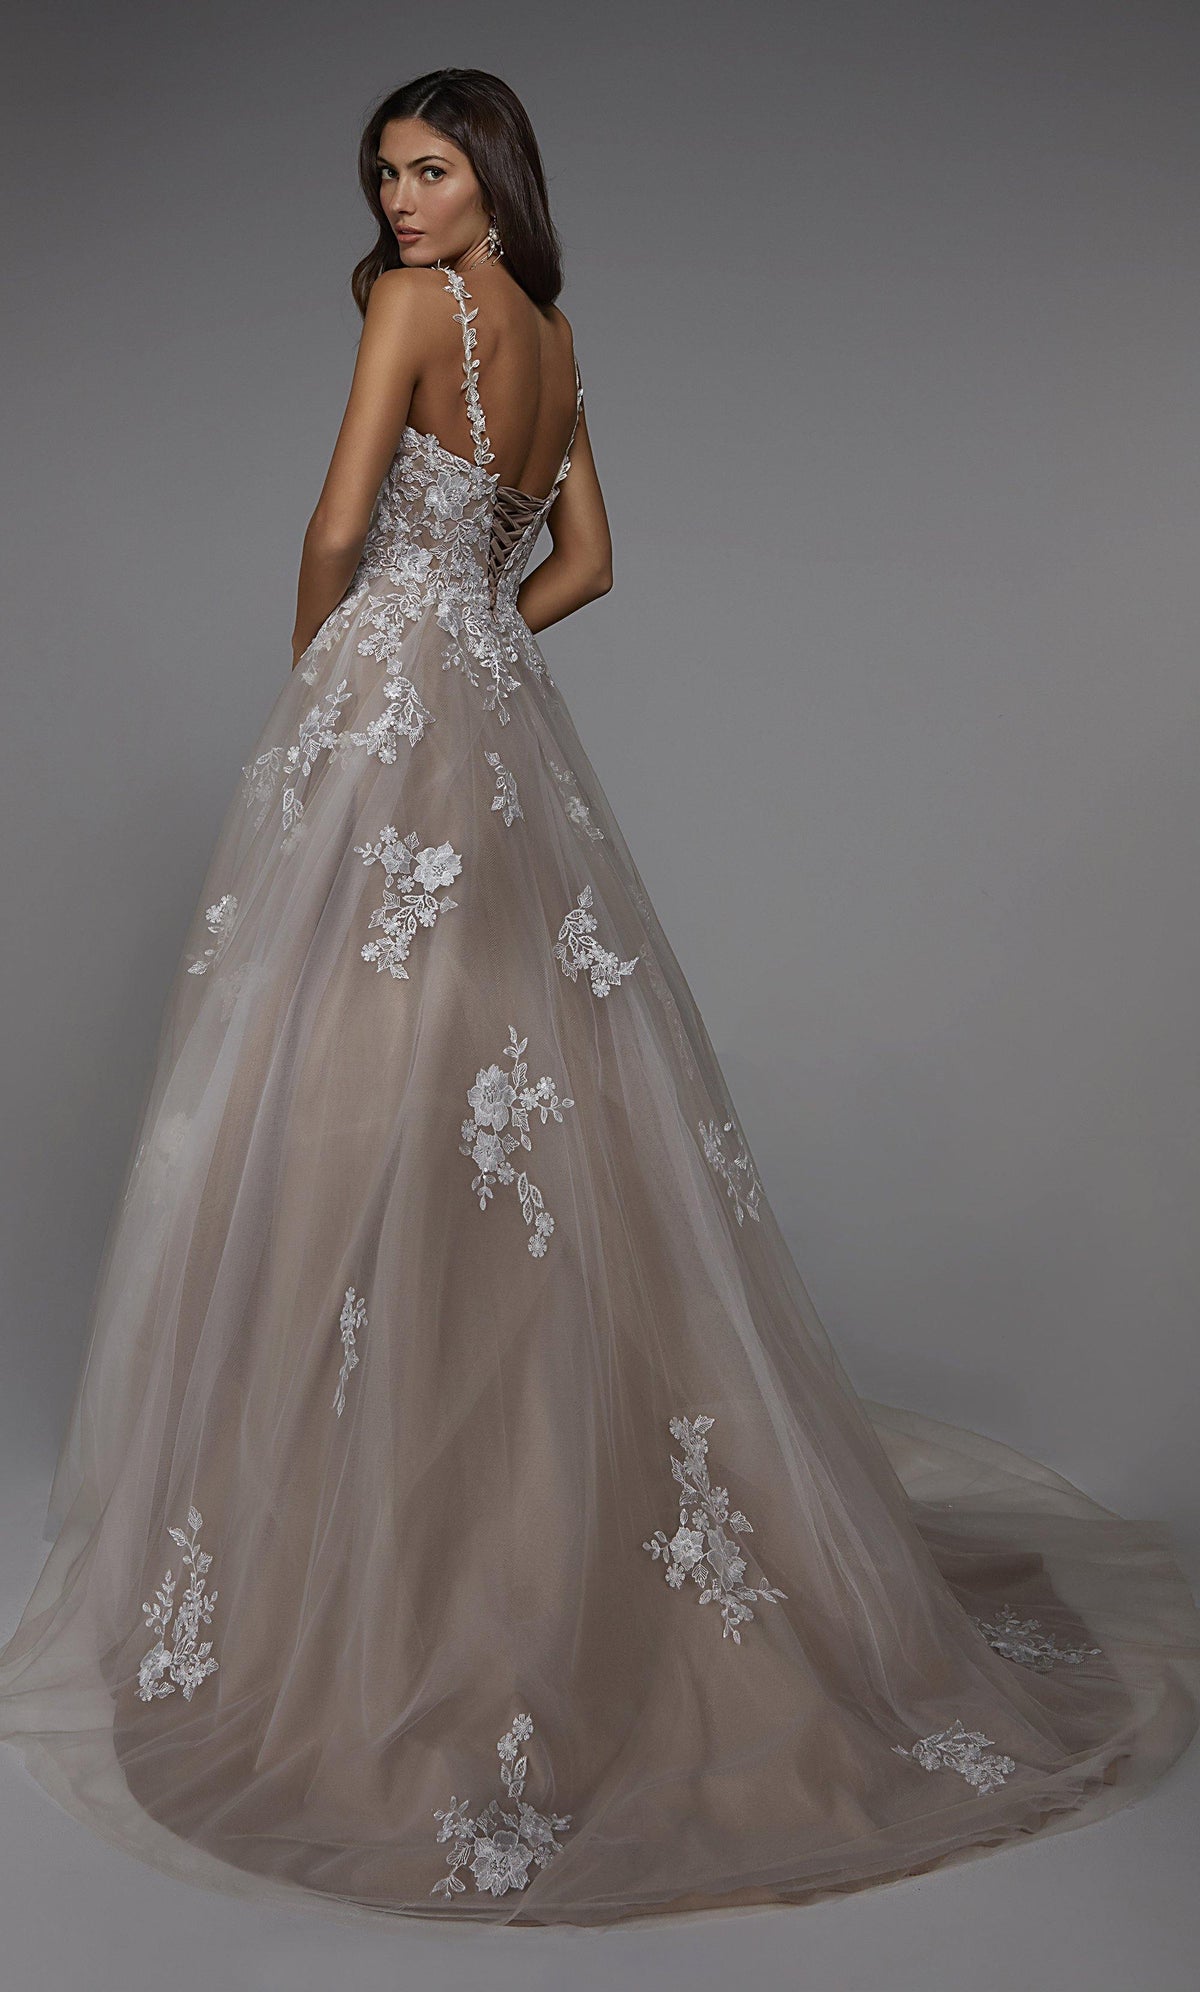 Formal Dress: 7043. Long Bridal Gown, Sweetheart Neckline, Ball Gown Alyce Paris